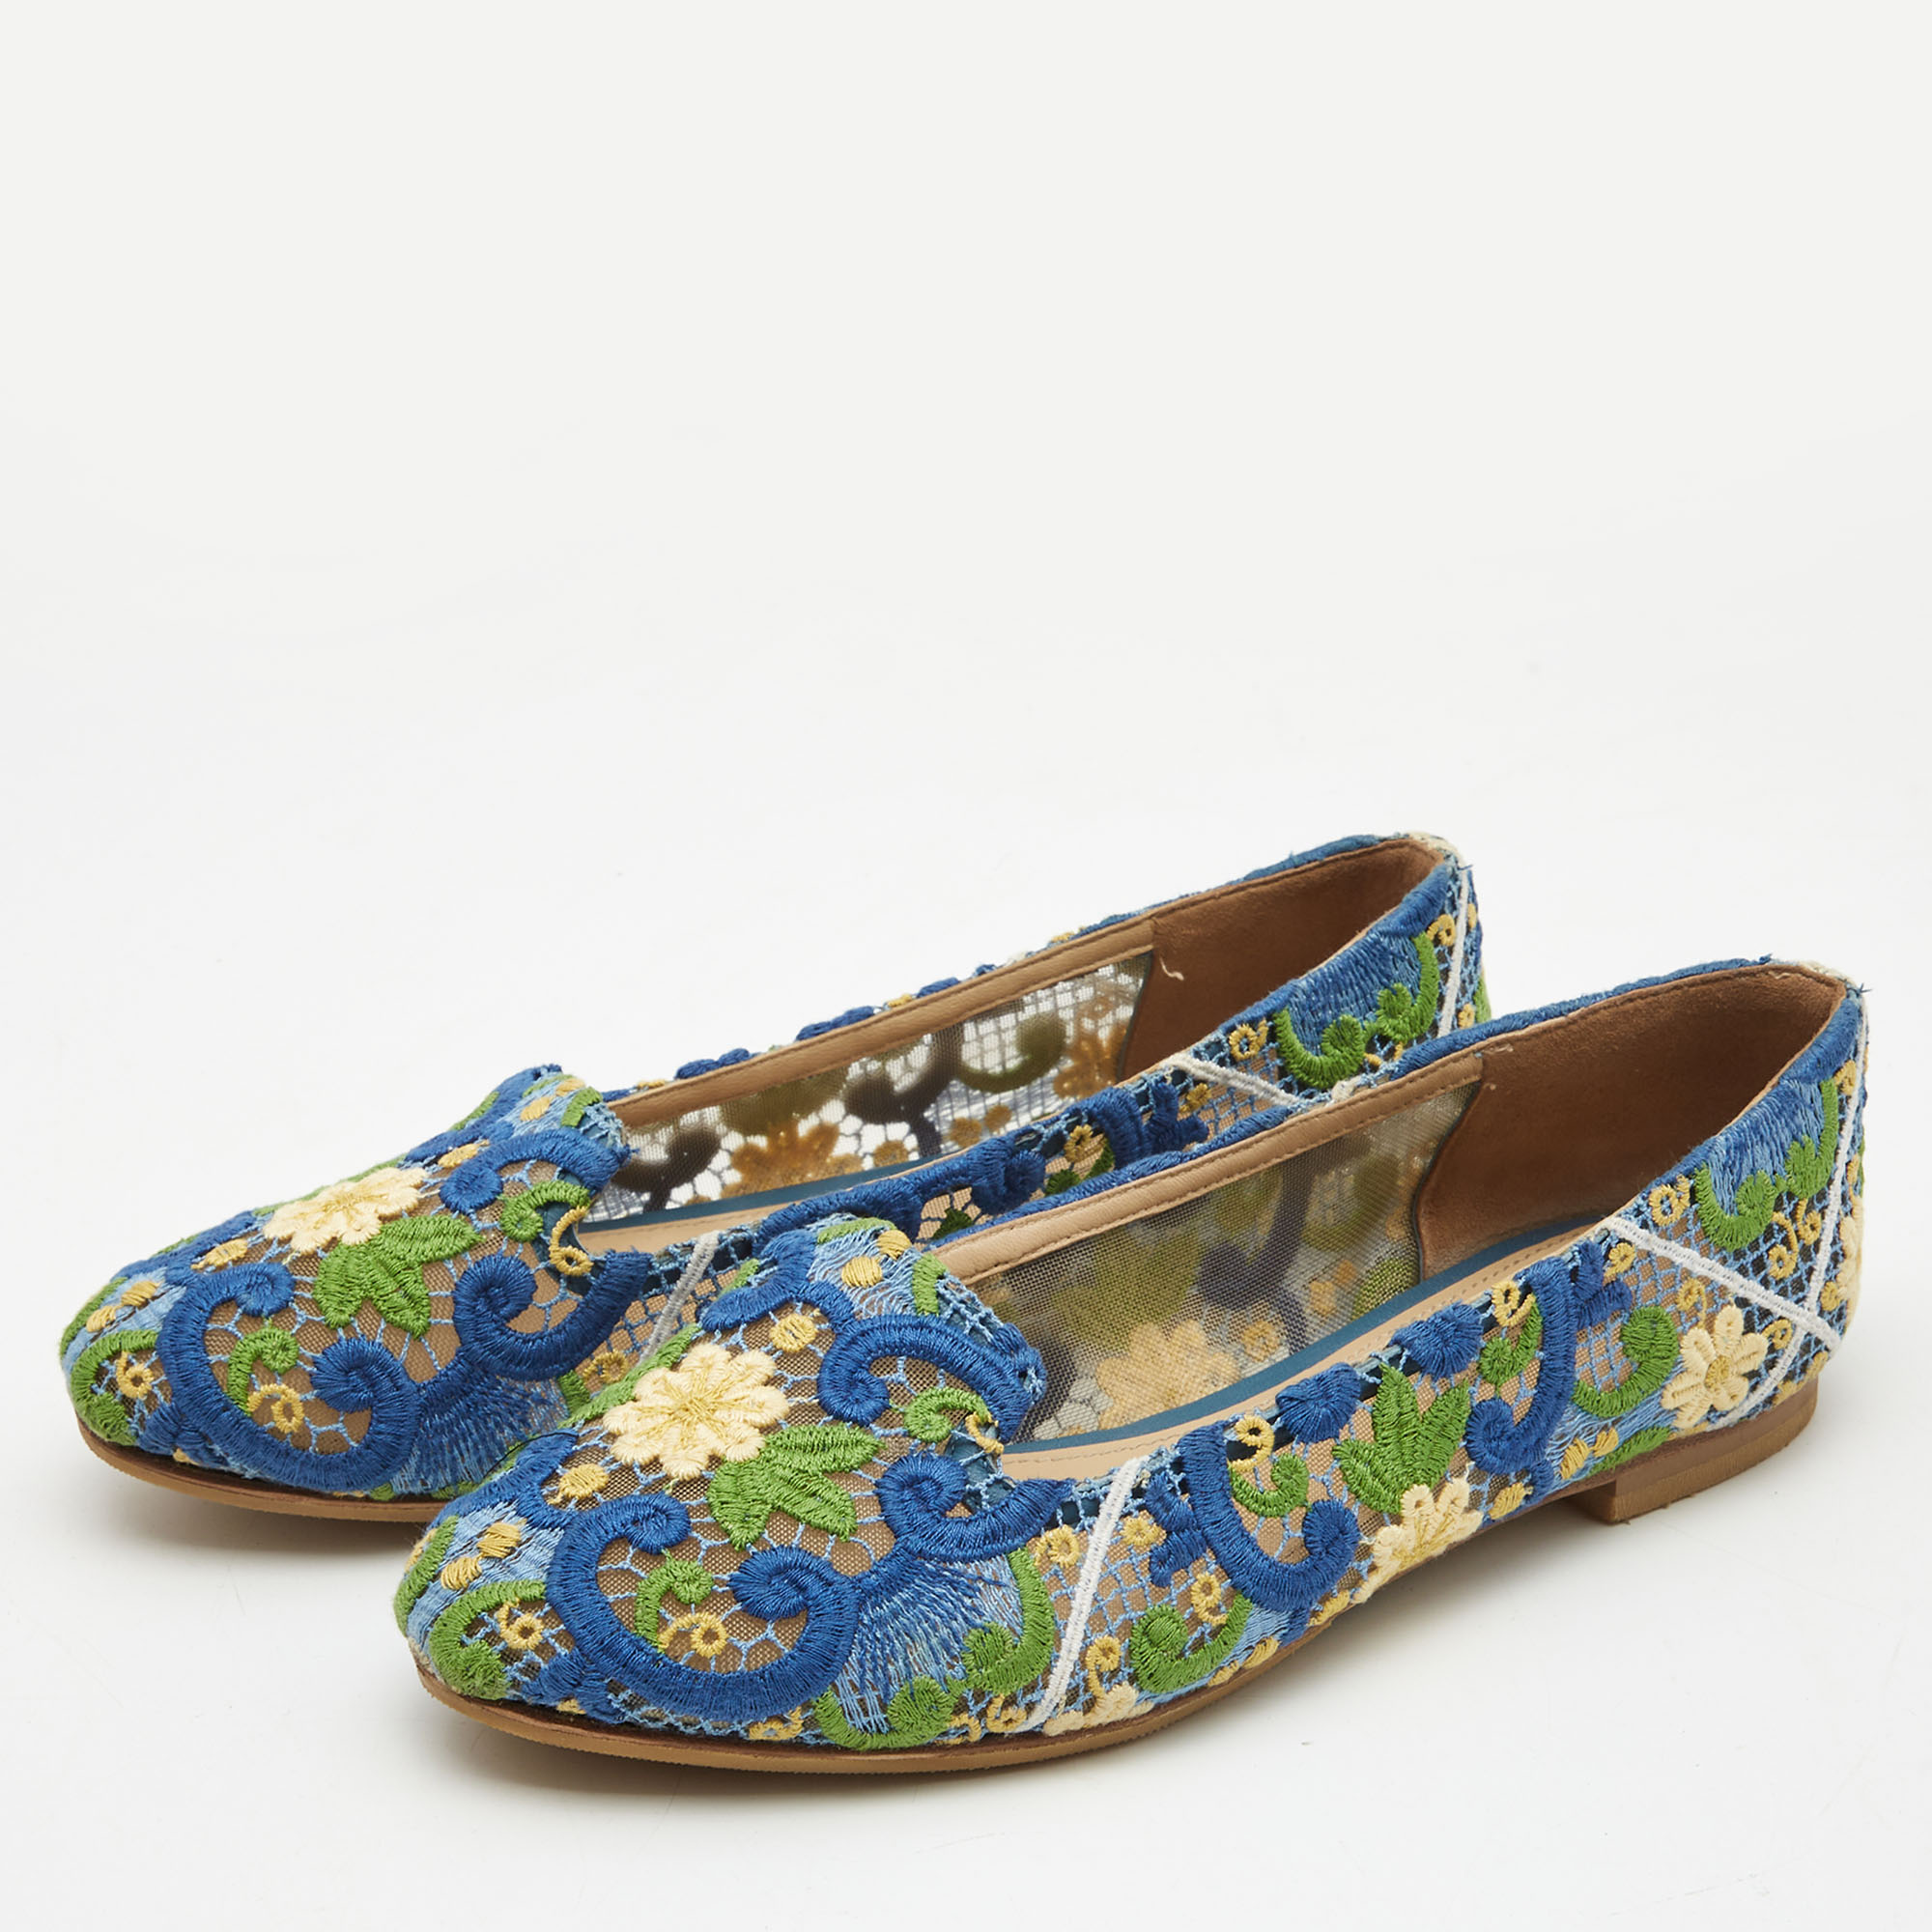 

Dolce & Gabbana Tricolor Floral Lace Smoking Slippers Size, Blue